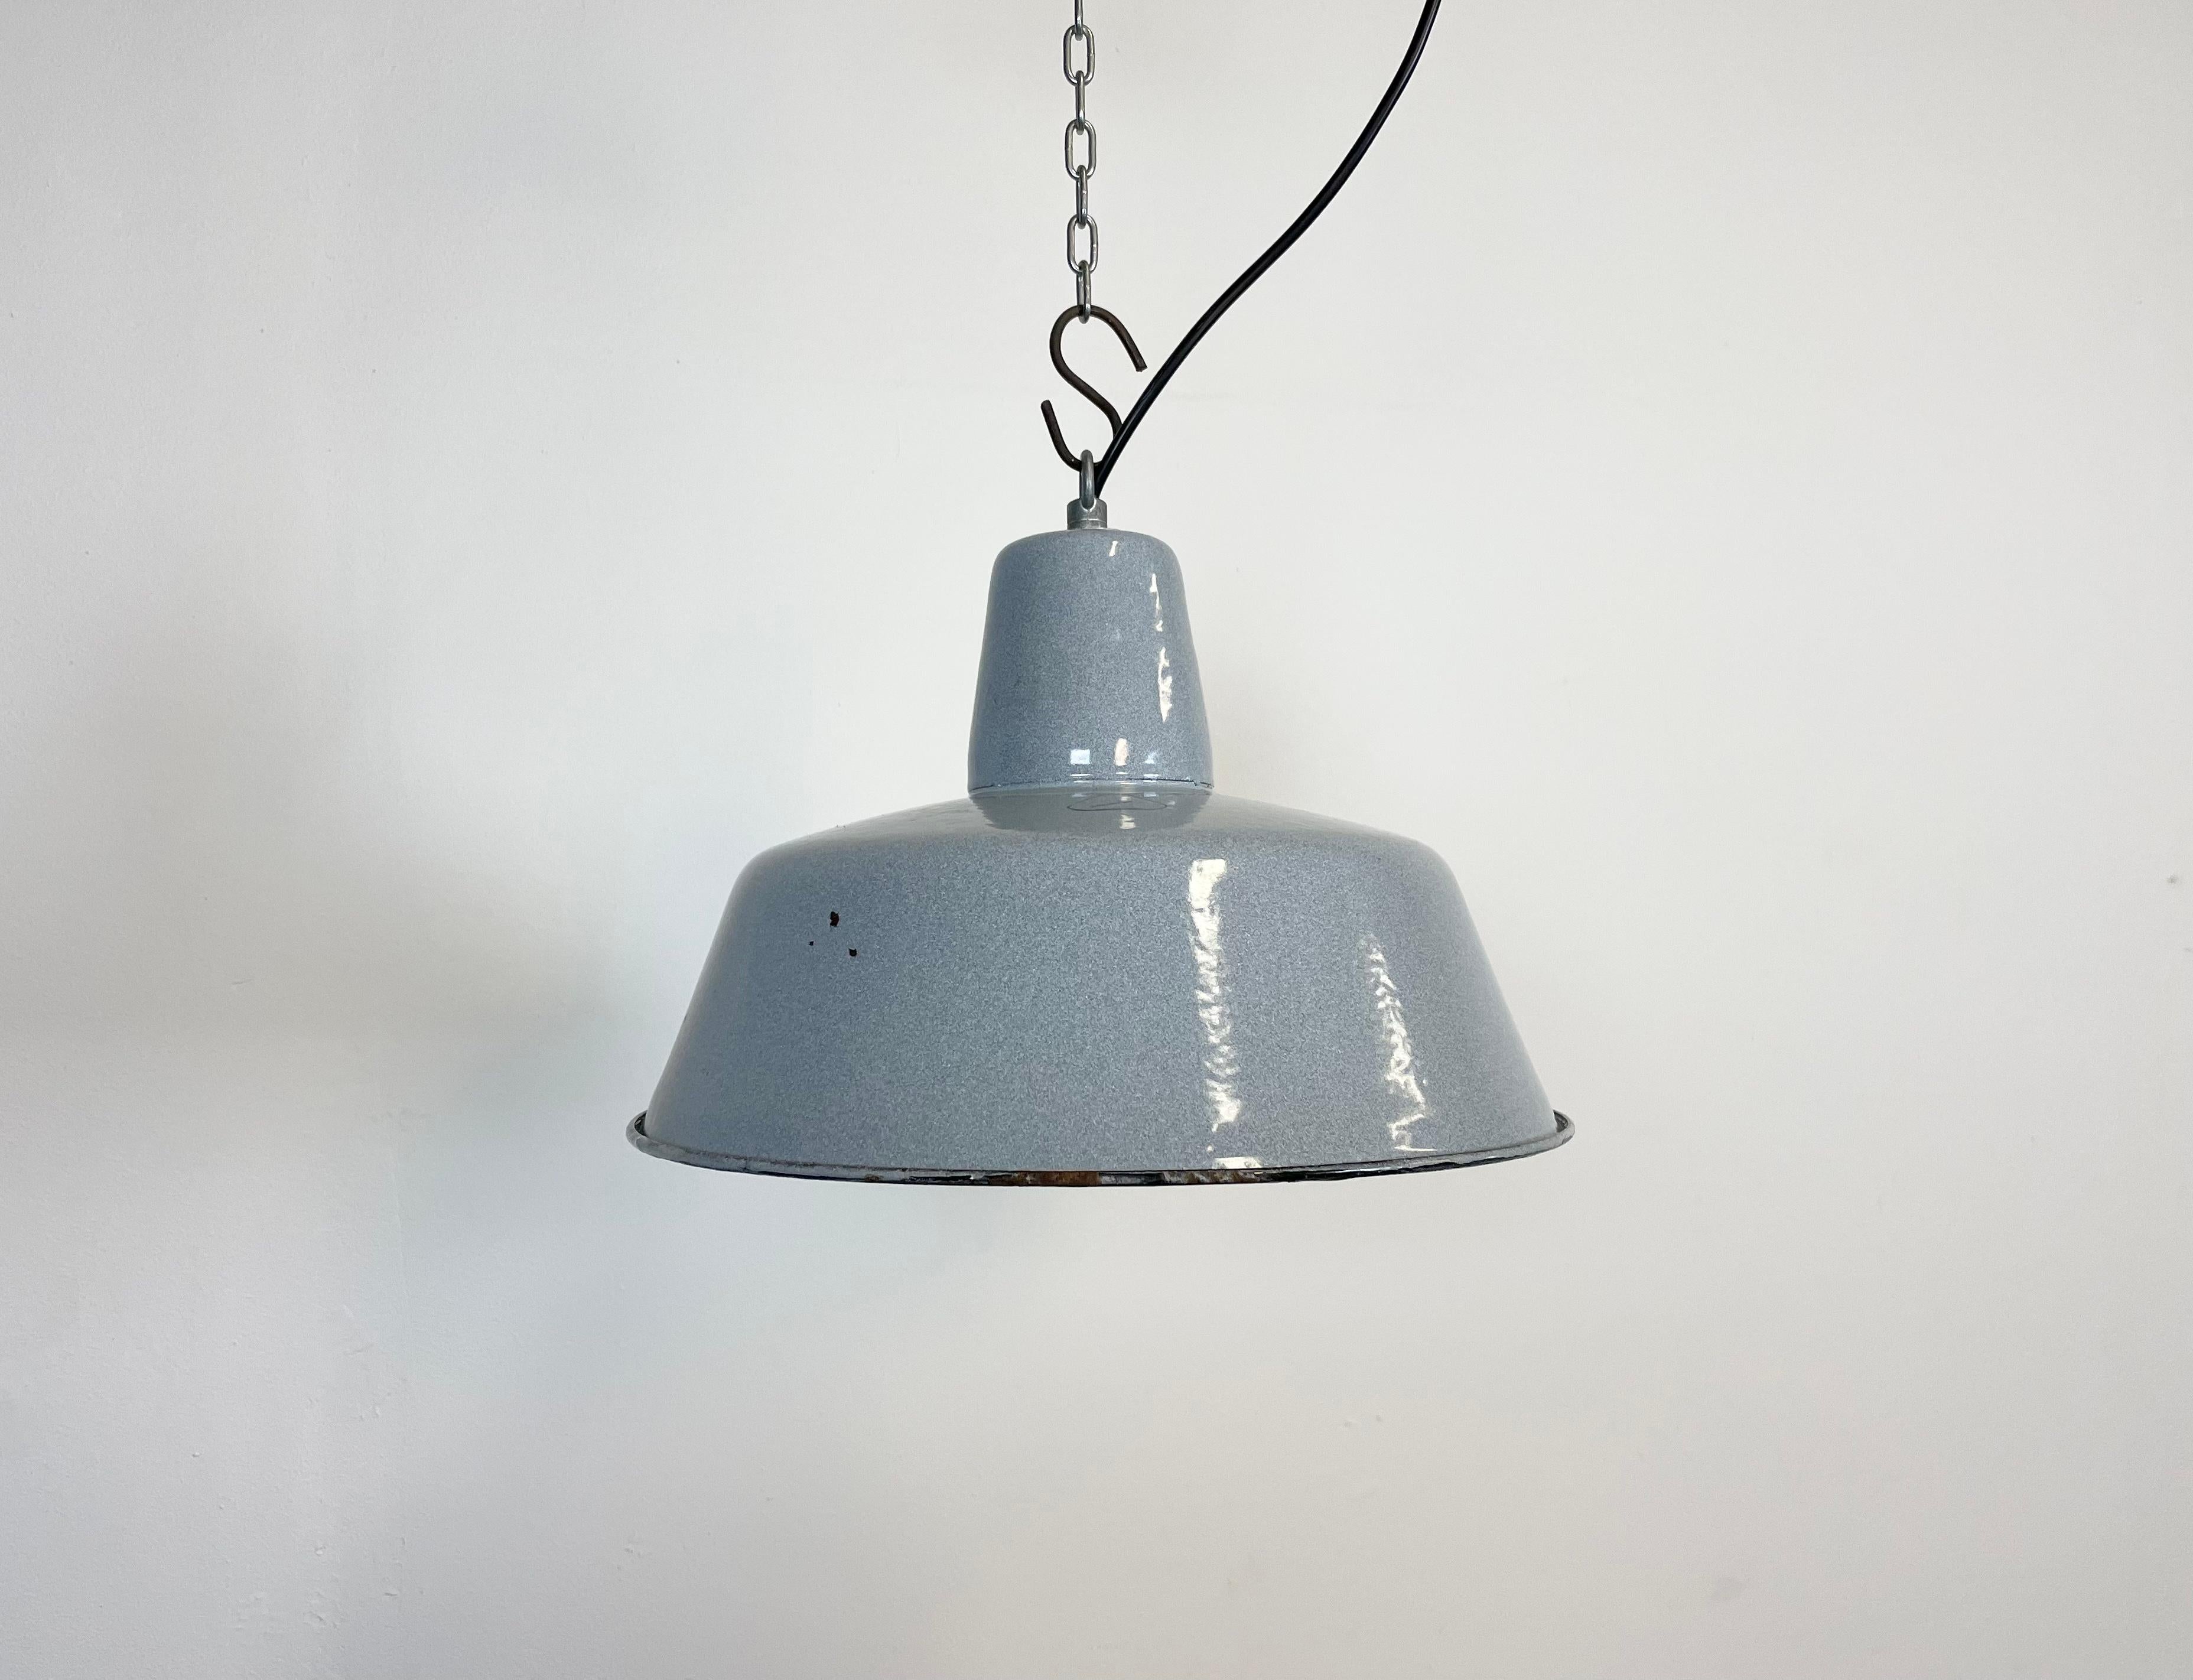 Industrial blue grey enamel pendant light made by KWE in Poland during the 1960s. White enamel inside the shade. Iron top. The porcelain socket requires E 27 light bulbs. New wire. Fully functional. The weight of the lamp is 1,2 kg.